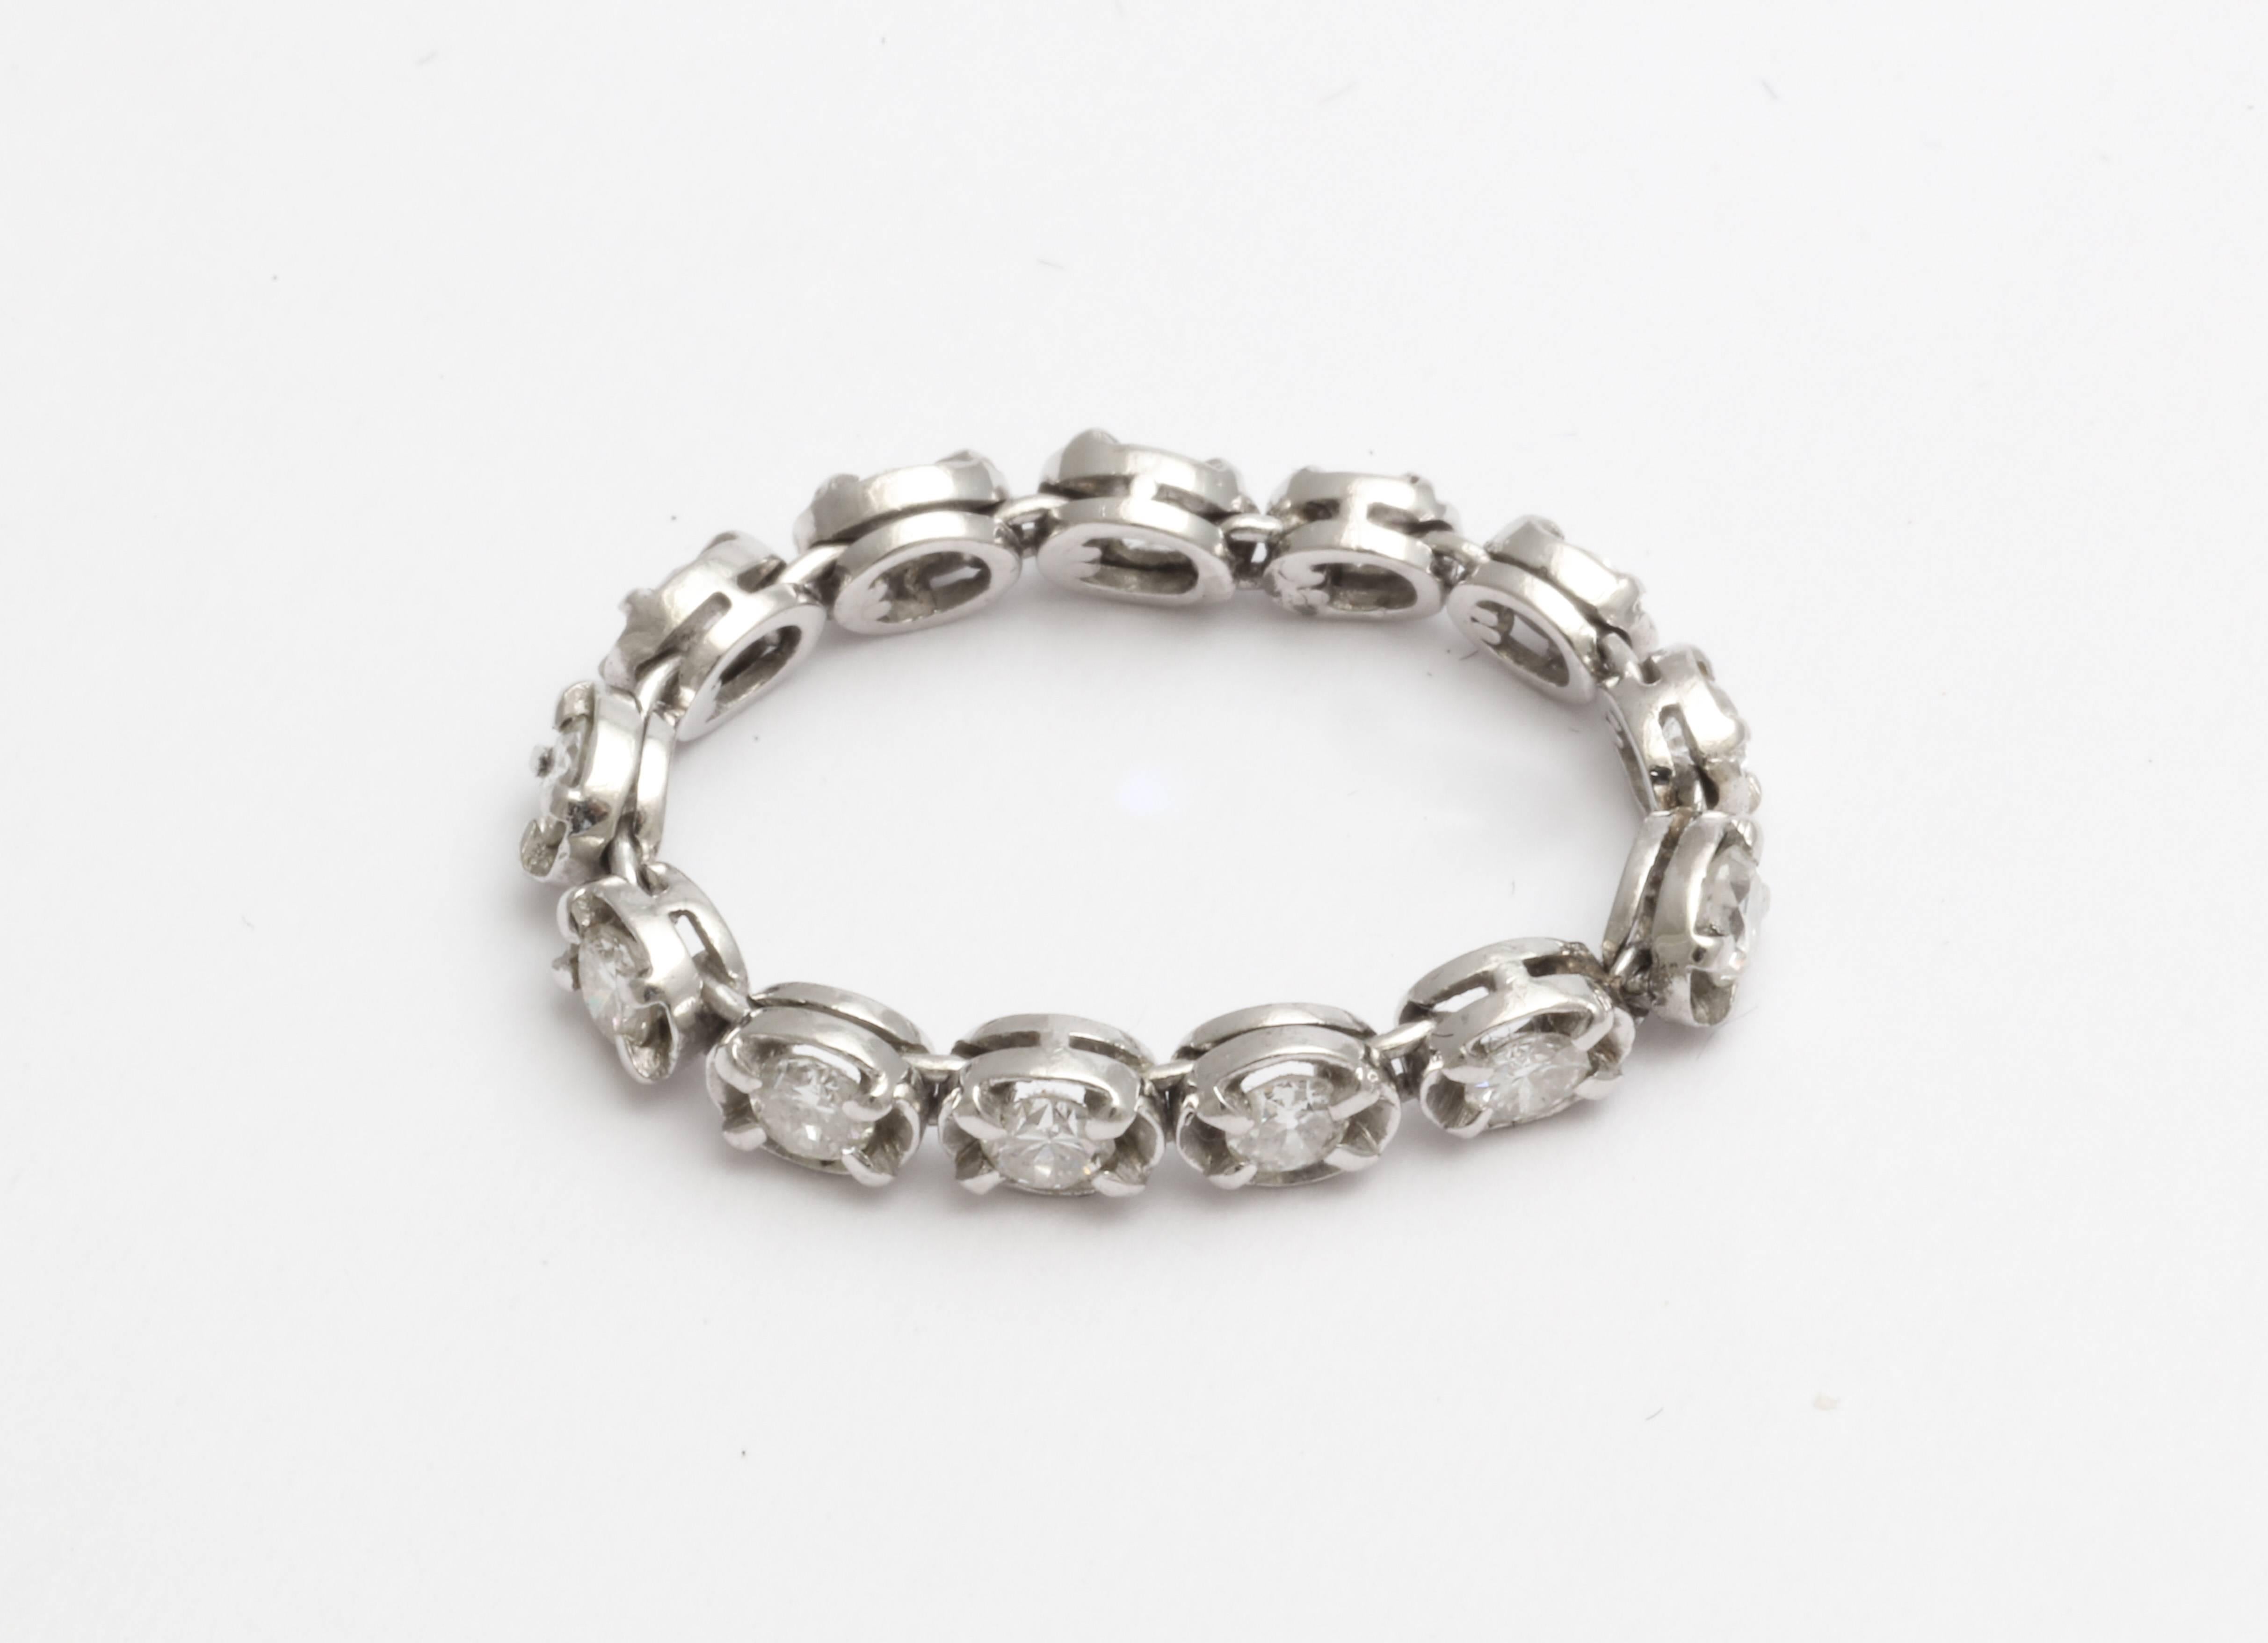 A beautiful vintage flexible eternity band with  very good quality diamonds set in platinum.  A vintage flexible band is hard to find.
size 5 1/2 plus.